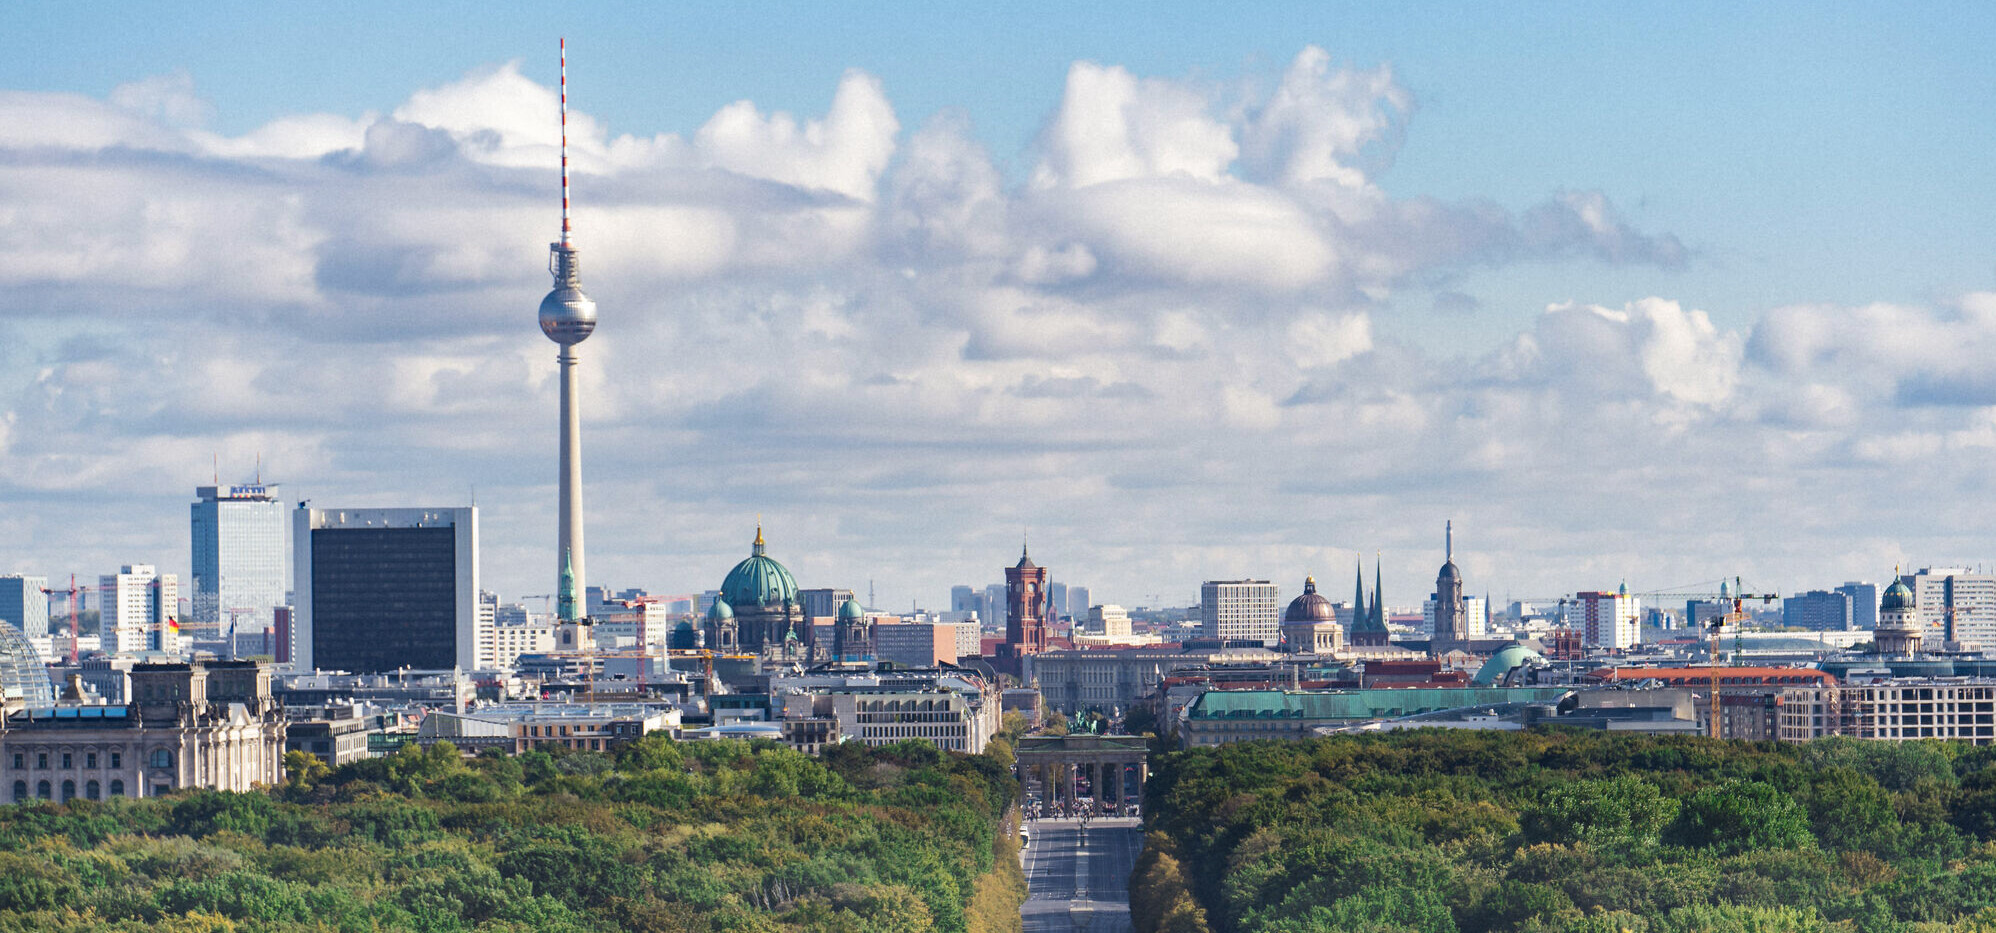 The Berlin Partner annual report shows Berlin as a city of growth and success.